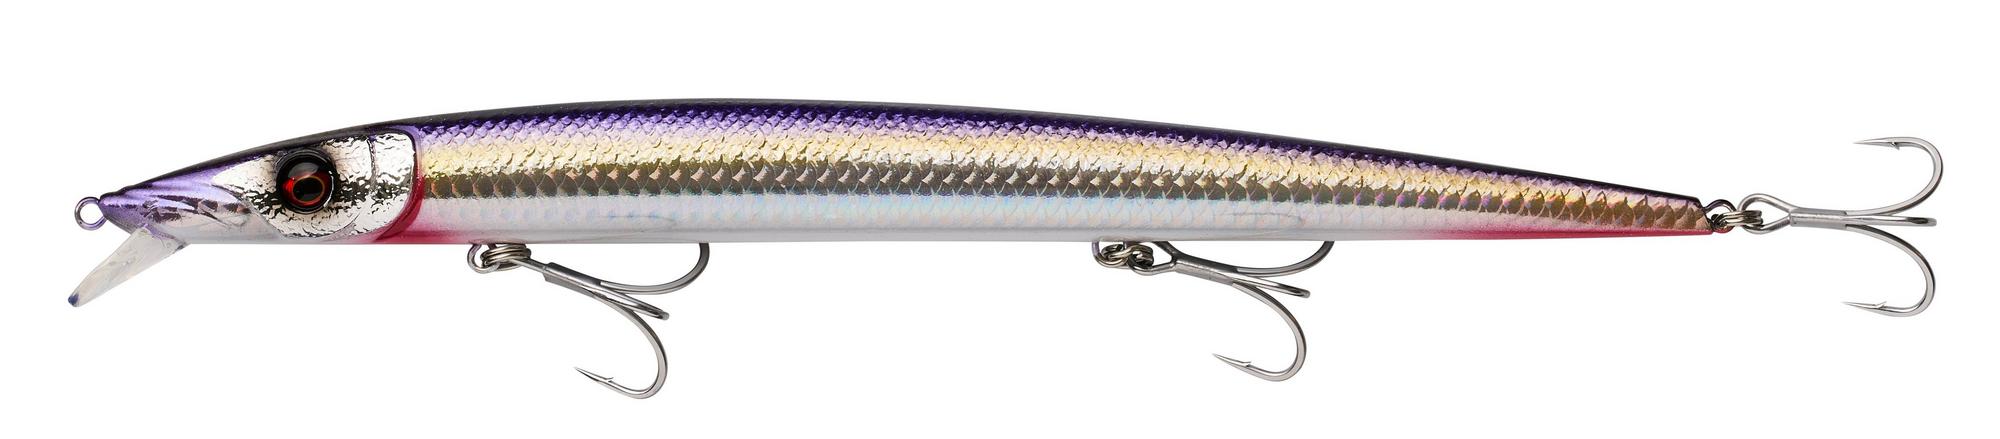 Savage Gear Barra Jerk Marine Fishing Lures 19cm (25g) - Gold Anchovy